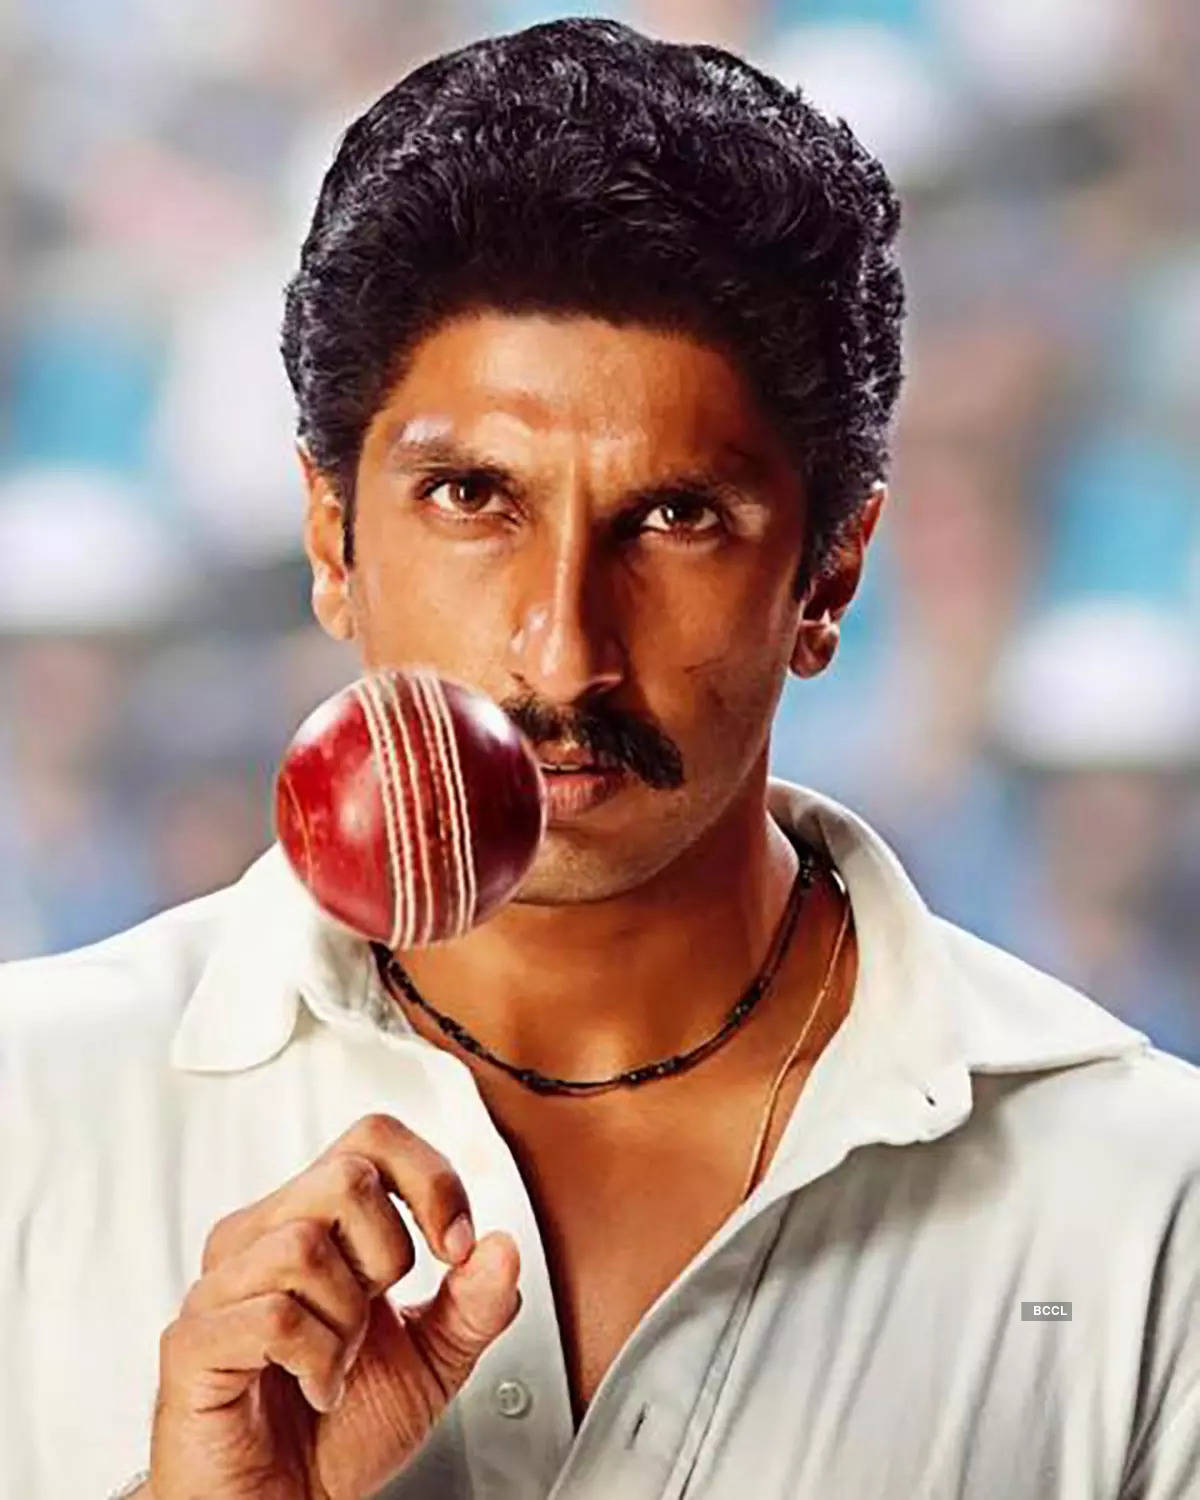 Kapil Dev's biopic '83' is not only receiving praise but also crossed 100 cr. mark at the box office